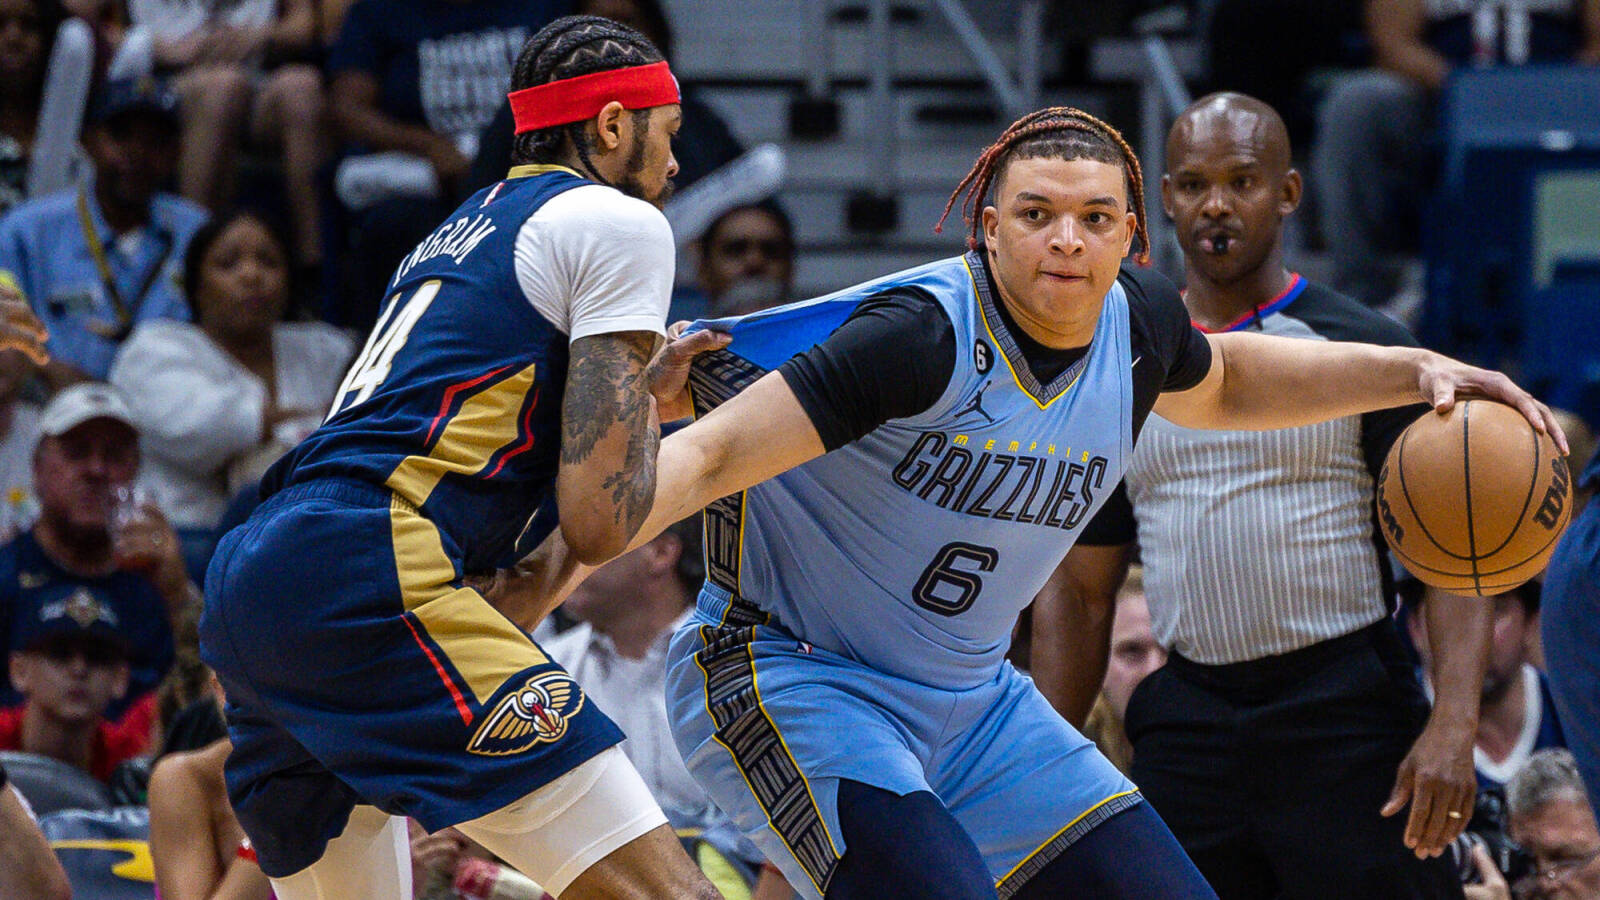 With Steven Adams out, Grizzlies sign G League Rookie of the Year